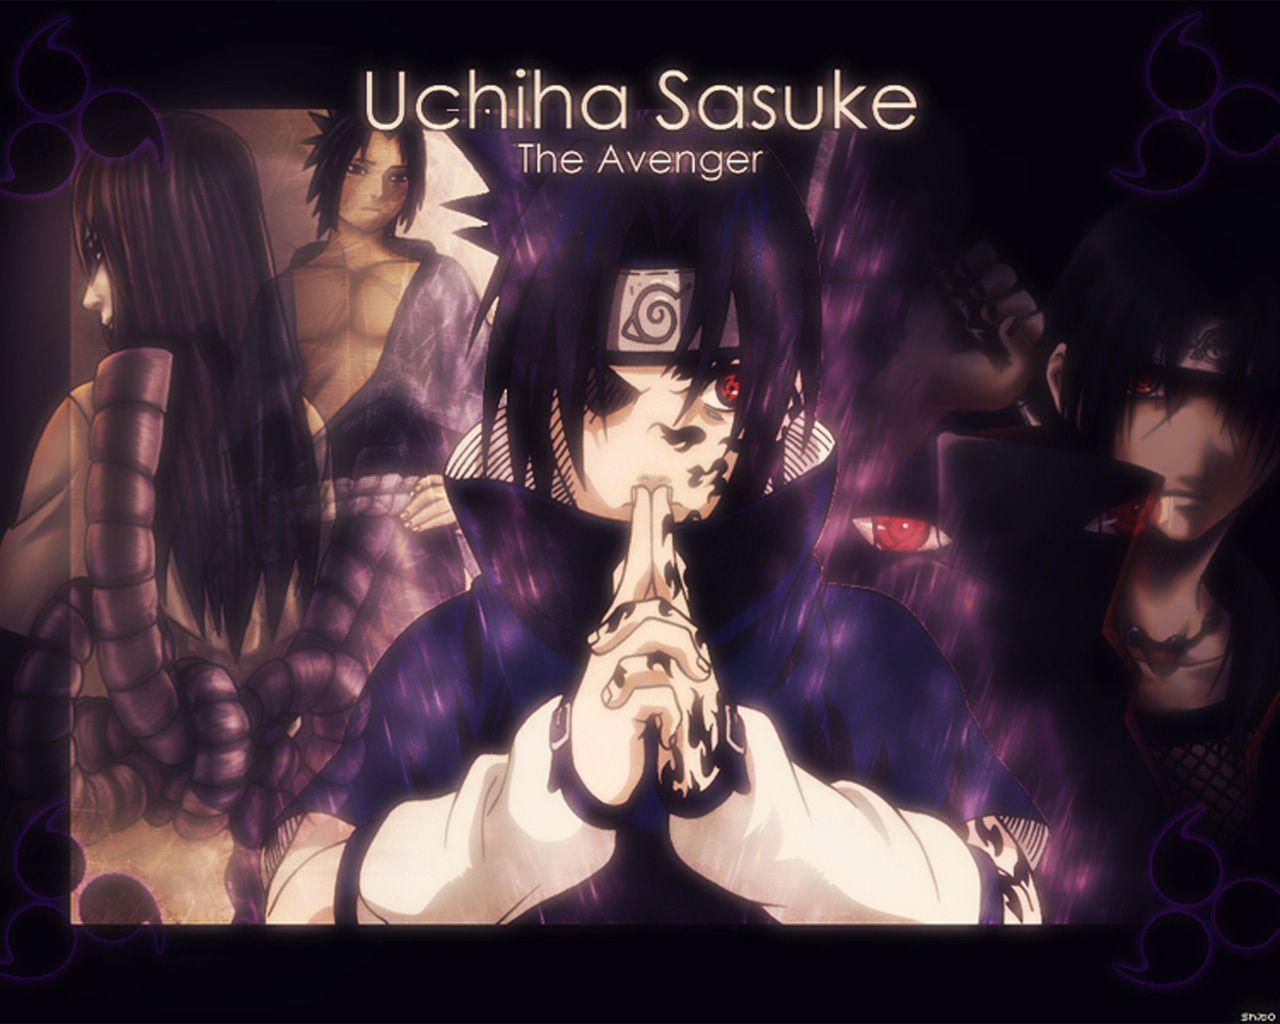 What do you think would happen if Naruto dumped Sasuke?